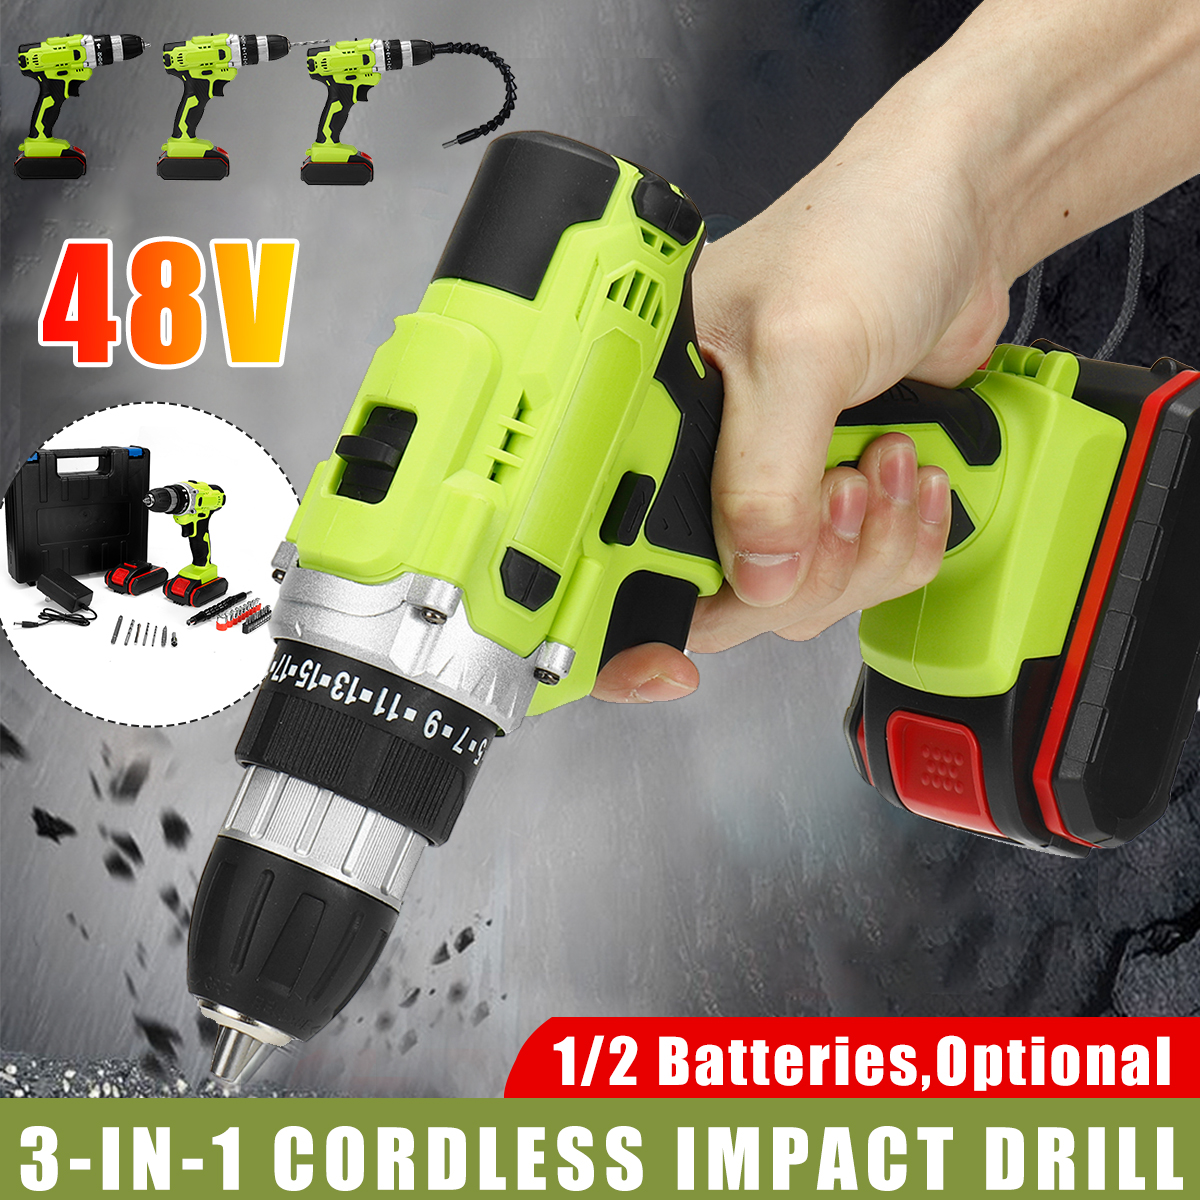 3-in-1-Multifunctional-Cordless-Electric-Drill-48VF-253-38-Inch-Chuck-Impact-Drill-W-12pcs-Battery-1839461-2